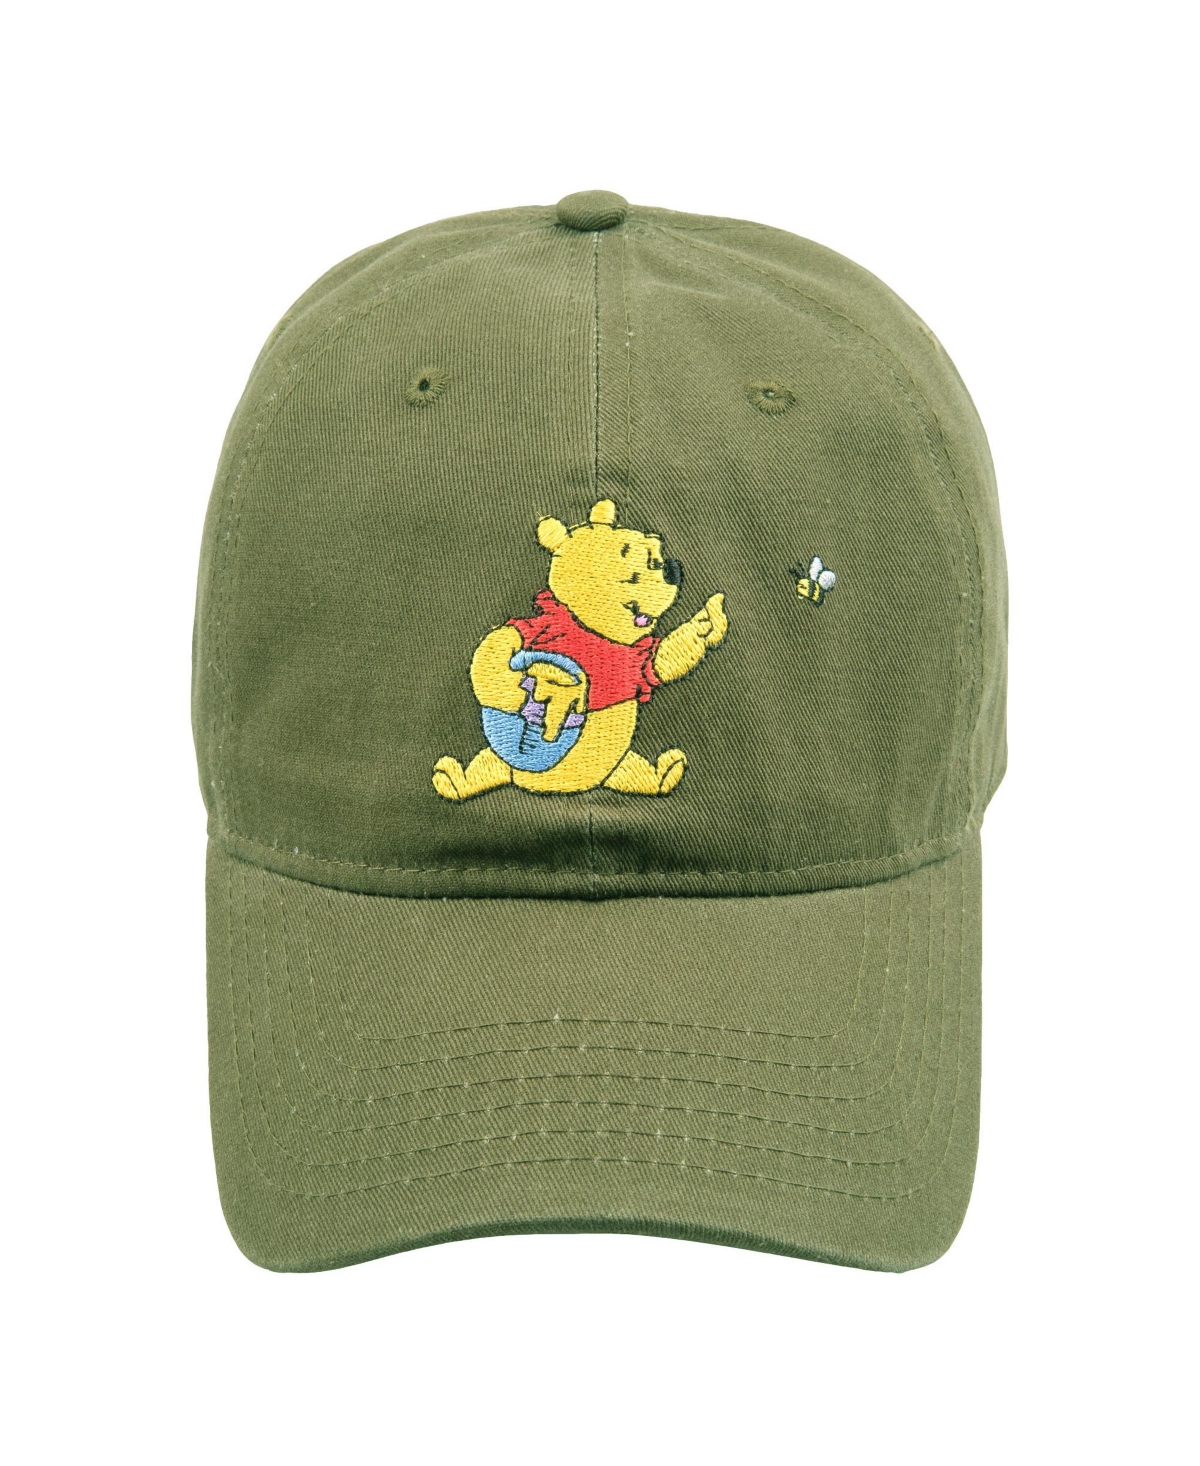 Concept One Disney's Winnie The Pooh Embroidered Cotton Adjustable Dad Hat - Olive